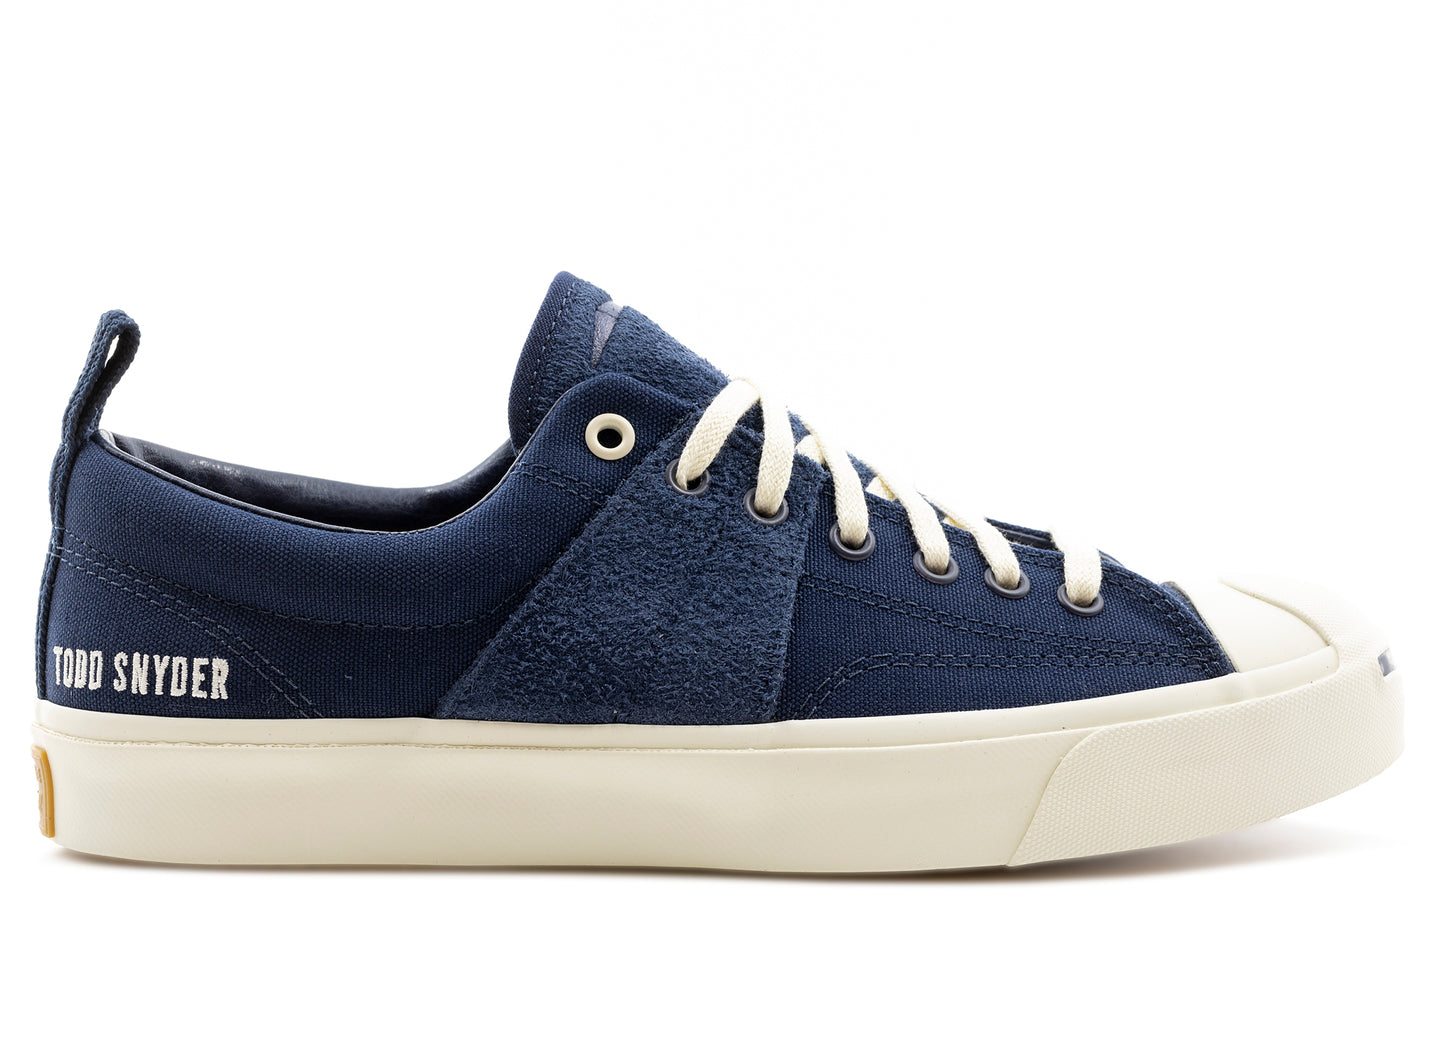 Converse x Todd SnyderJack Purcell Ox